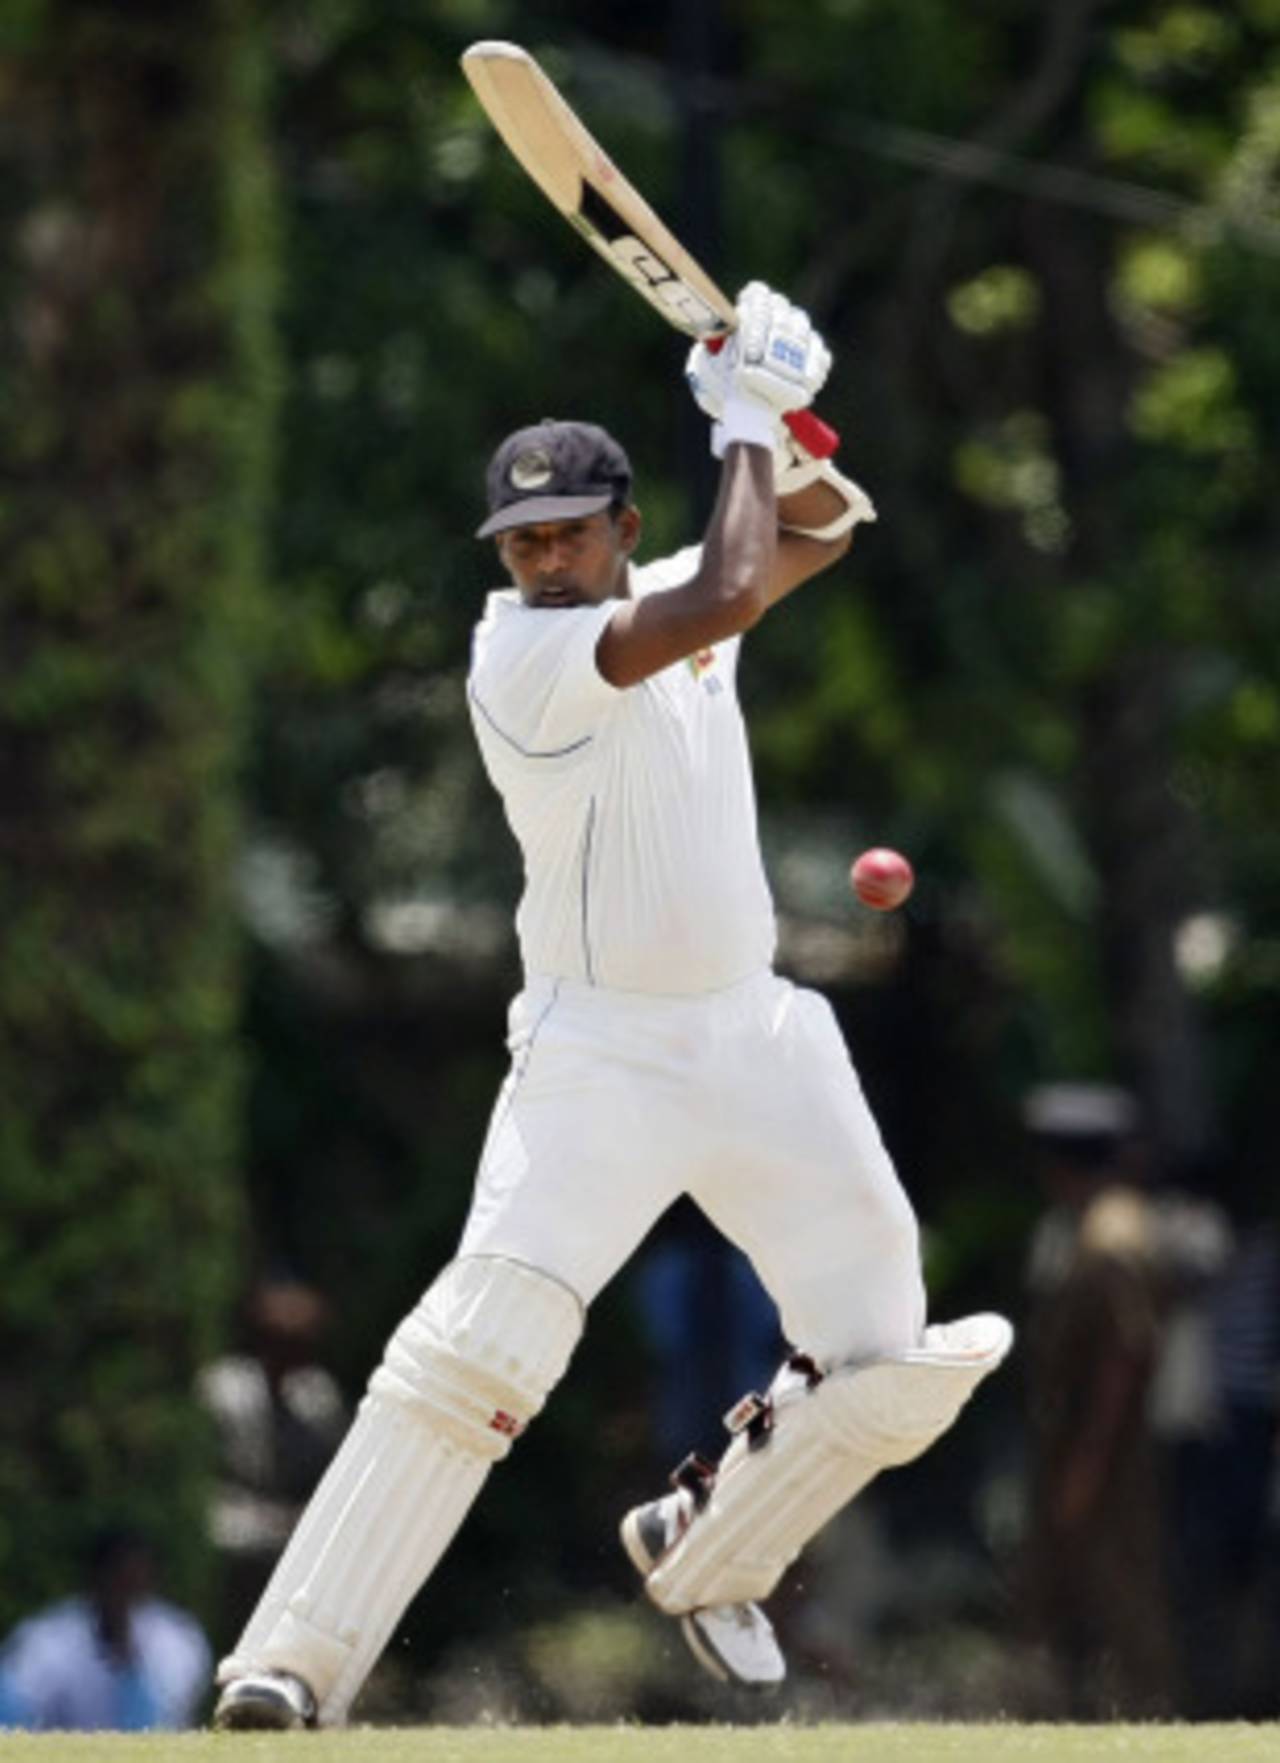 Although Thilan Samaraweera's first movement is forward, he is adept at moving back swiftly&nbsp;&nbsp;&bull;&nbsp;&nbsp;Associated Press